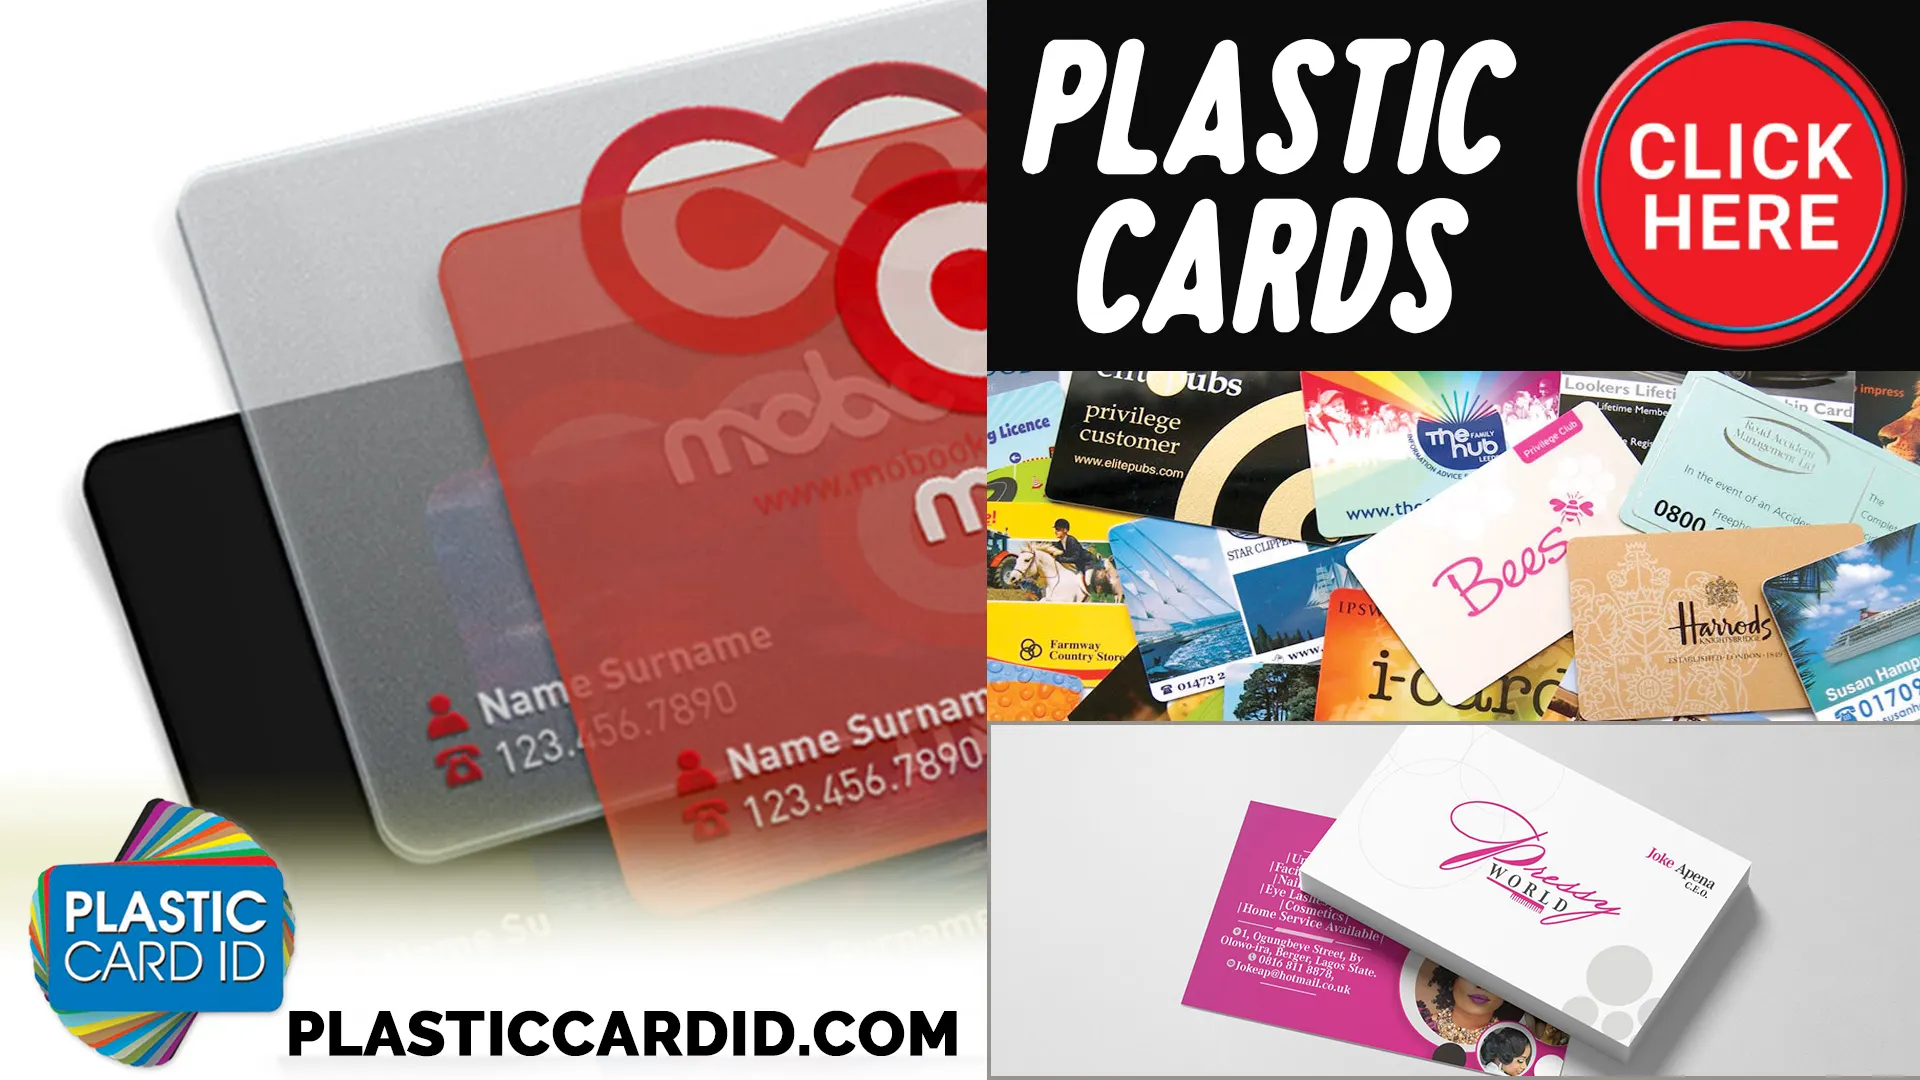 Benefits of Plastic Cards for Your Organization